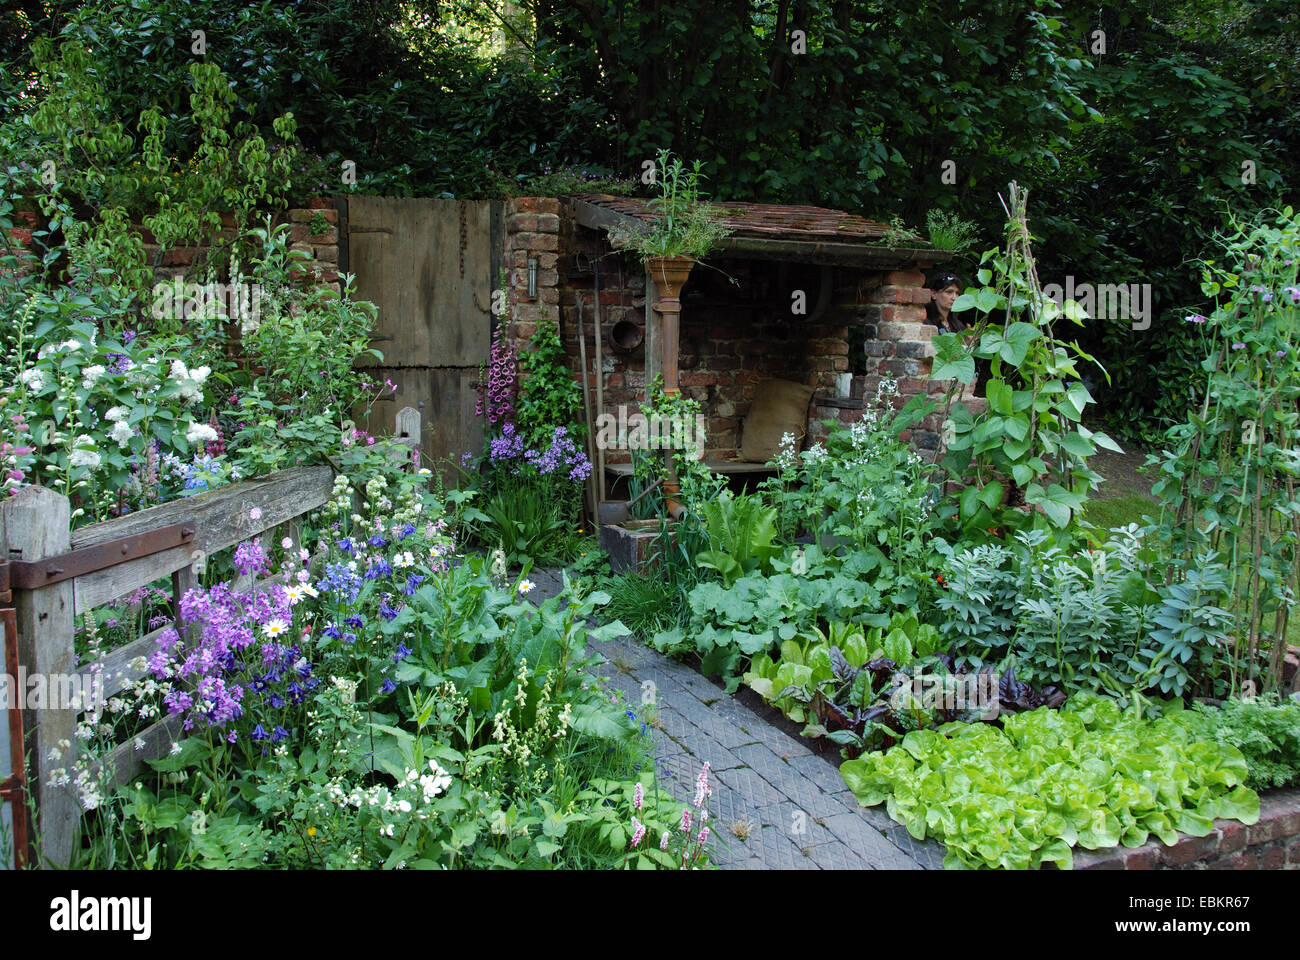 a w gardening services' 'the old gate' courtyard show garden stock